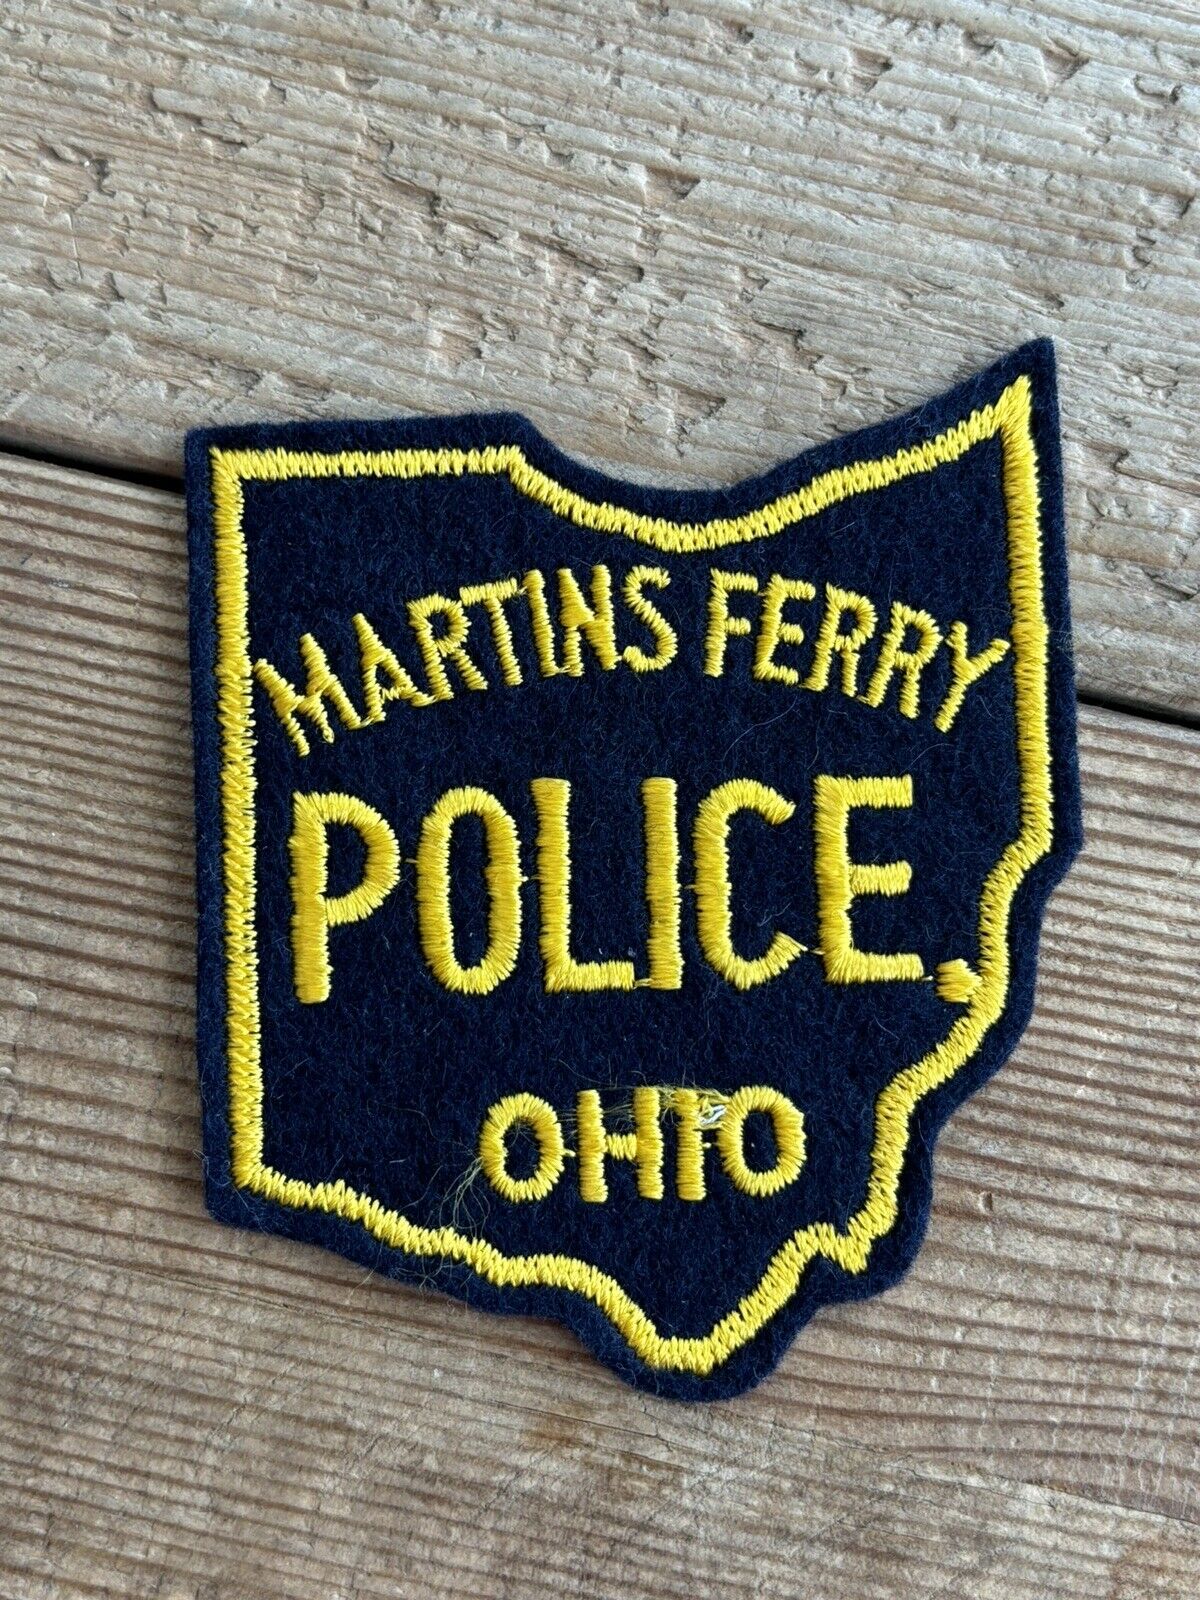 Martins Ferry Ohio OH Police Shoulder Patch New Rare State Shape Shaped